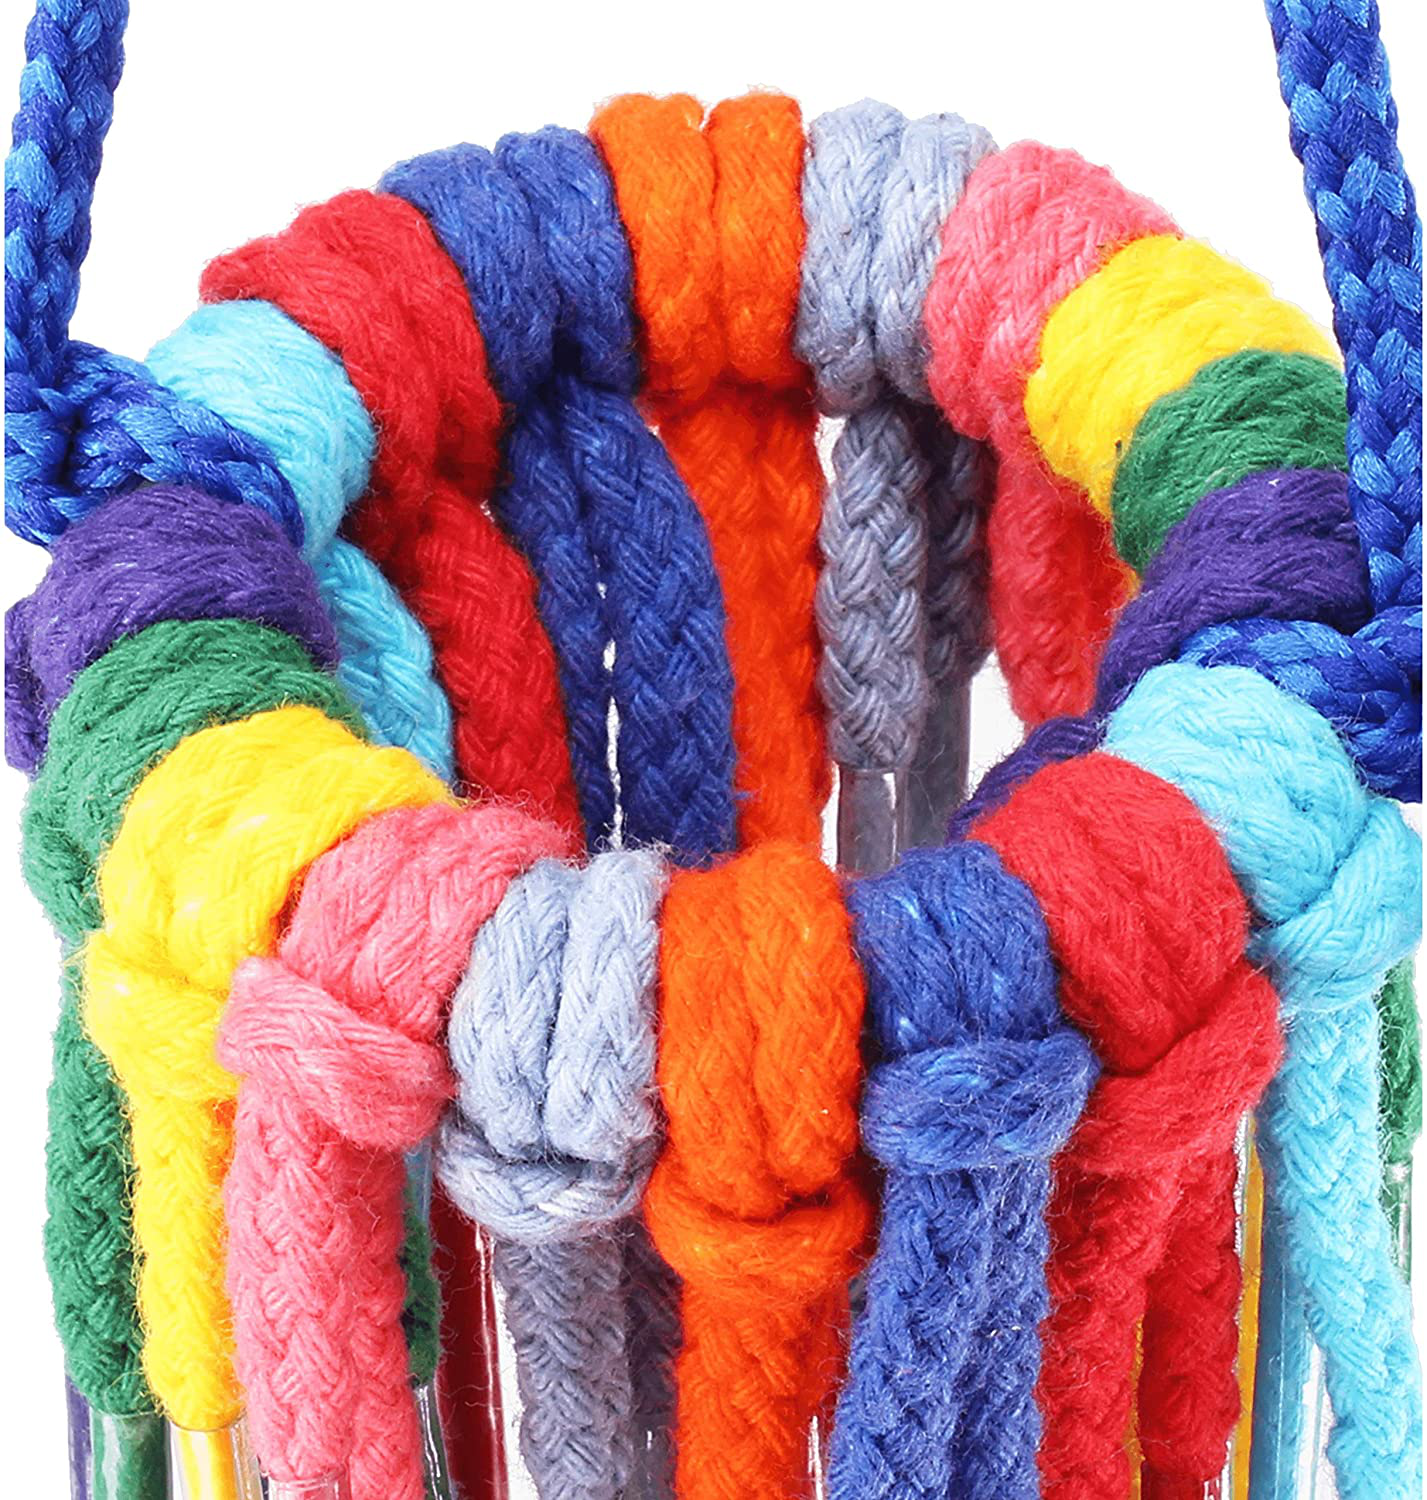 Bonka Bird Toys Aglet Cotton Colorful Chew Pull Parrot Parrotlet Quaker Budgie Finch Macaw Cockatoo